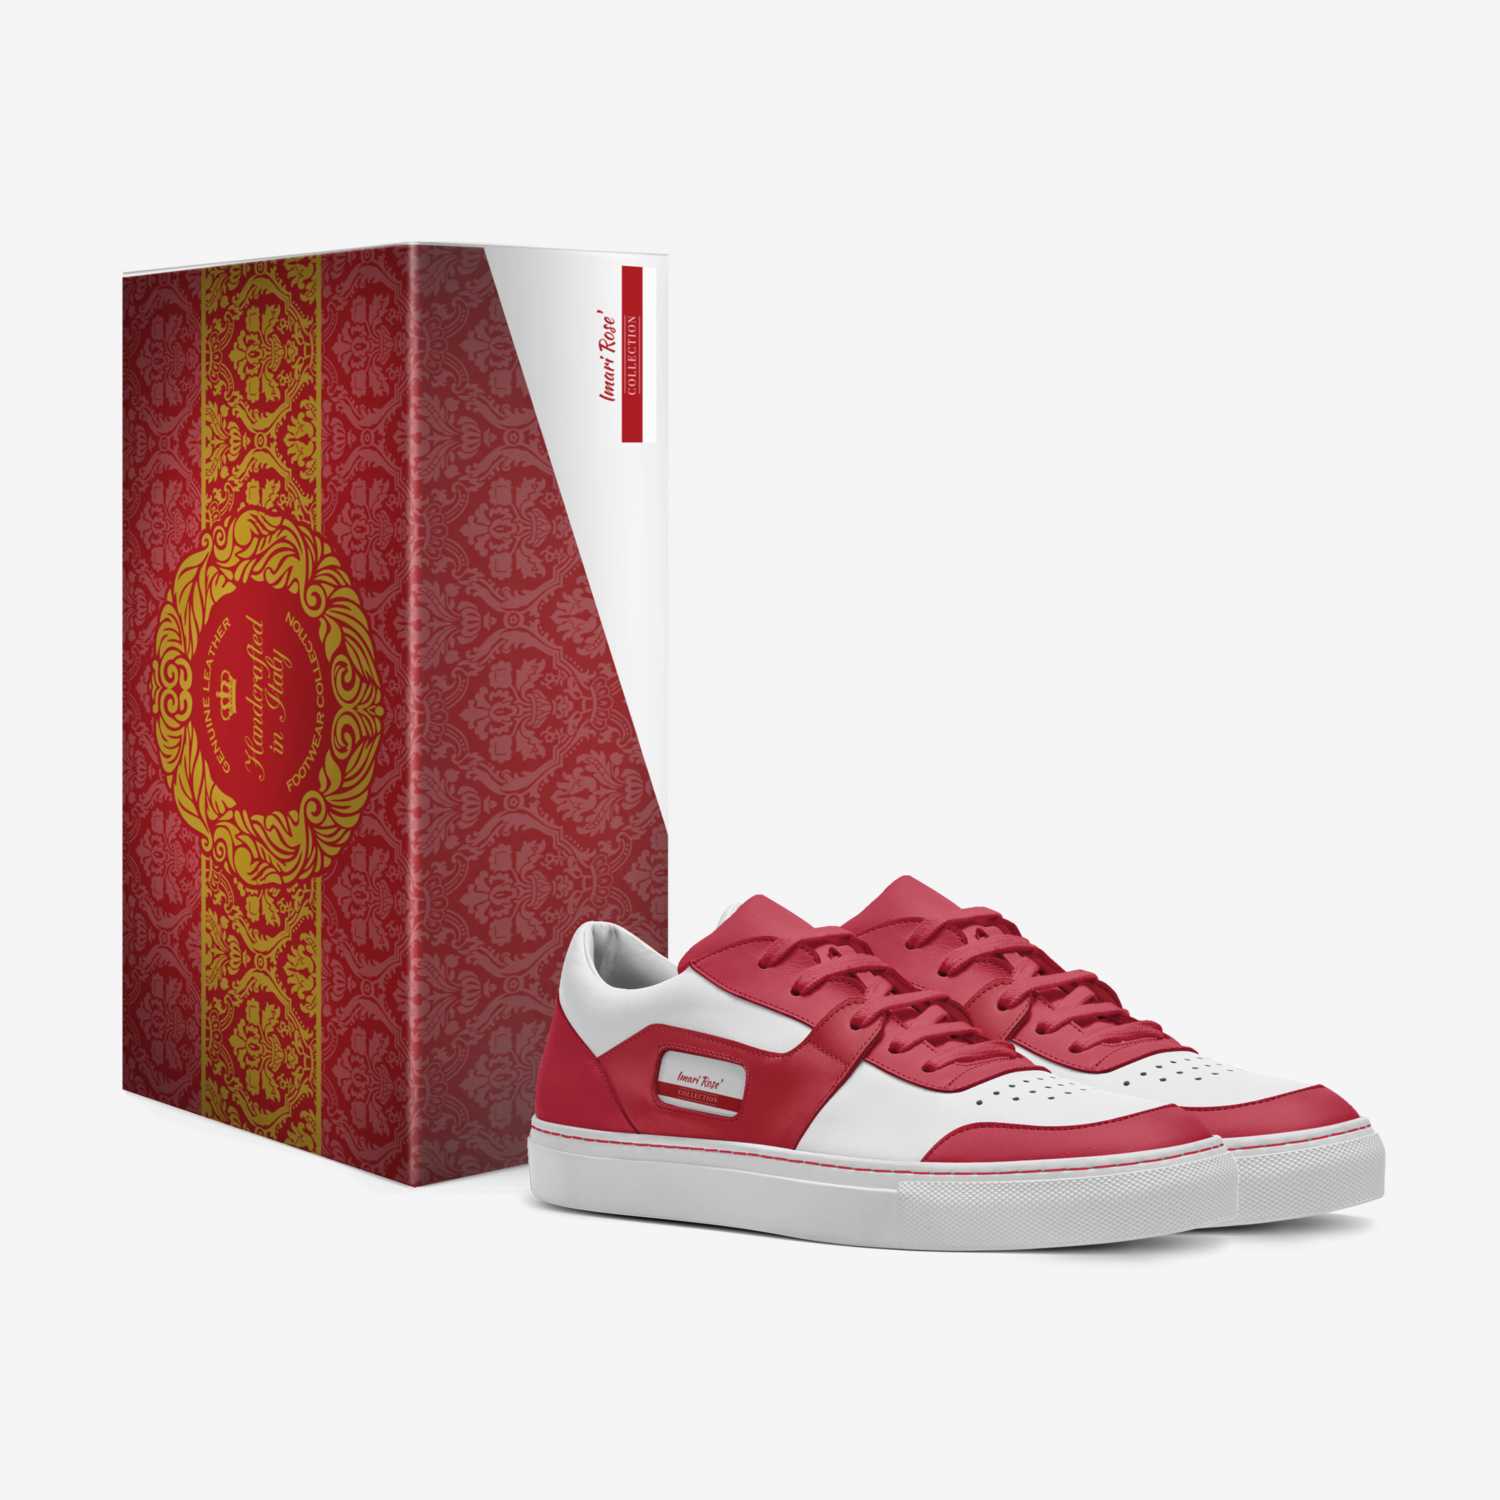 Imari Rose'   custom made in Italy shoes by Bill Porter | Box view